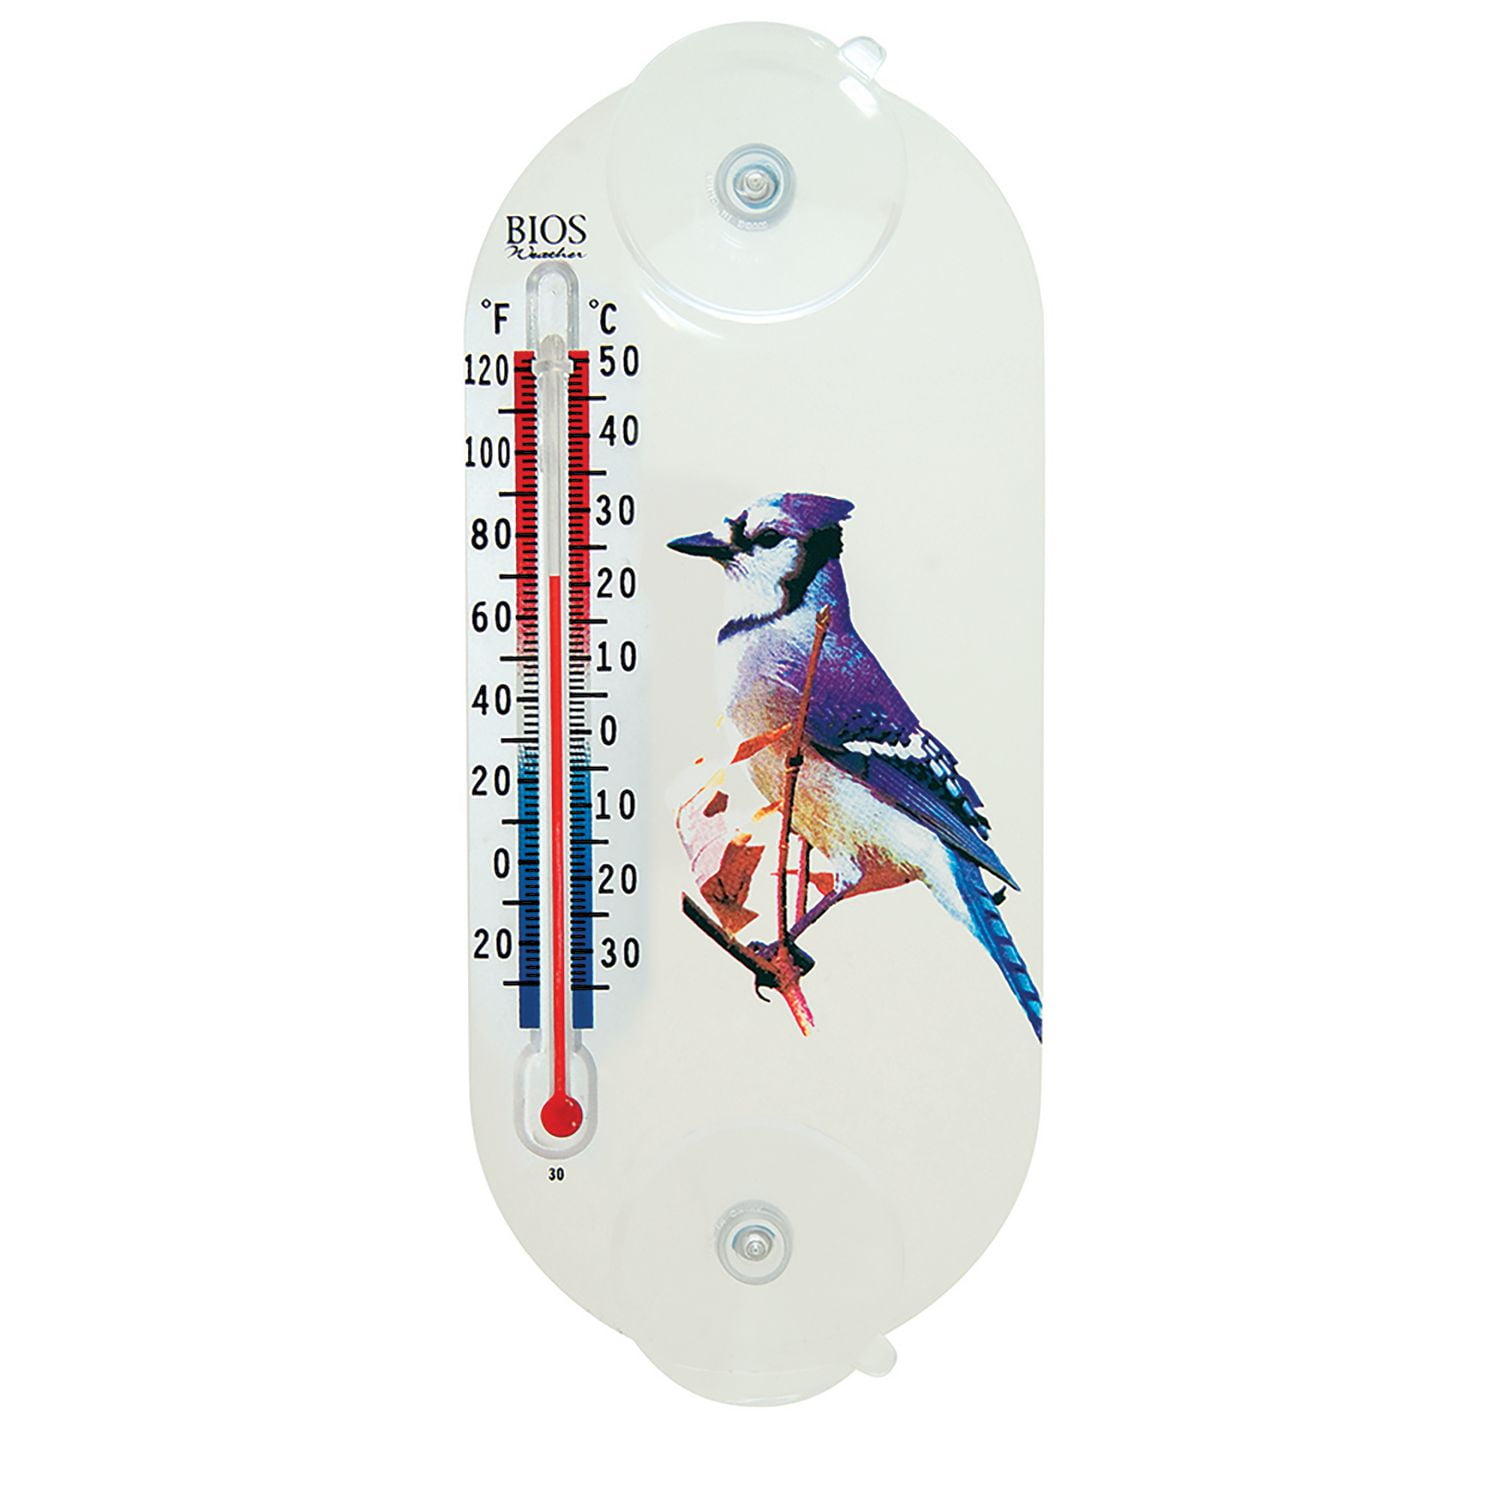 BIOS In/Outdoor Suction Cup Thermometer, Blue Jay Thermometer